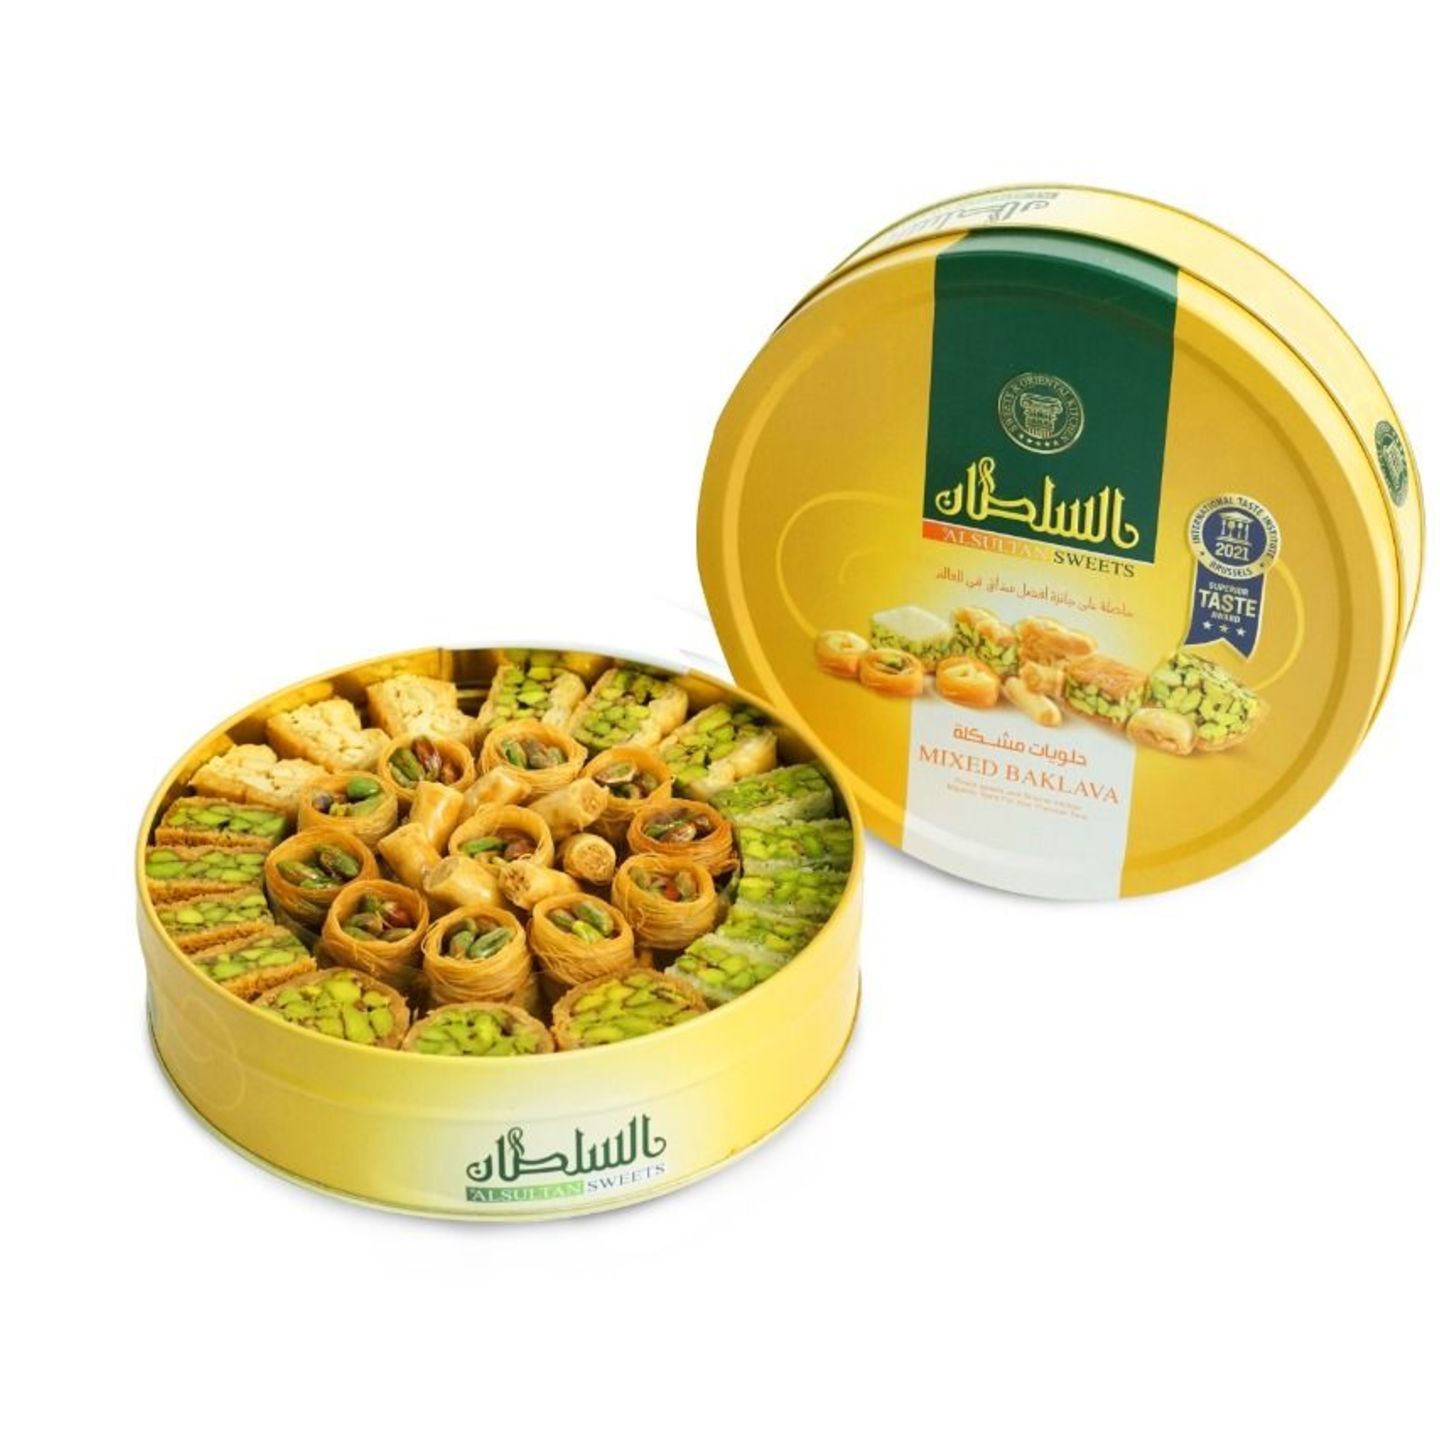 Alsultan Sweets Mixed Baklava Middle Eastern Sweet Desert Made From Dry Fruits 350g